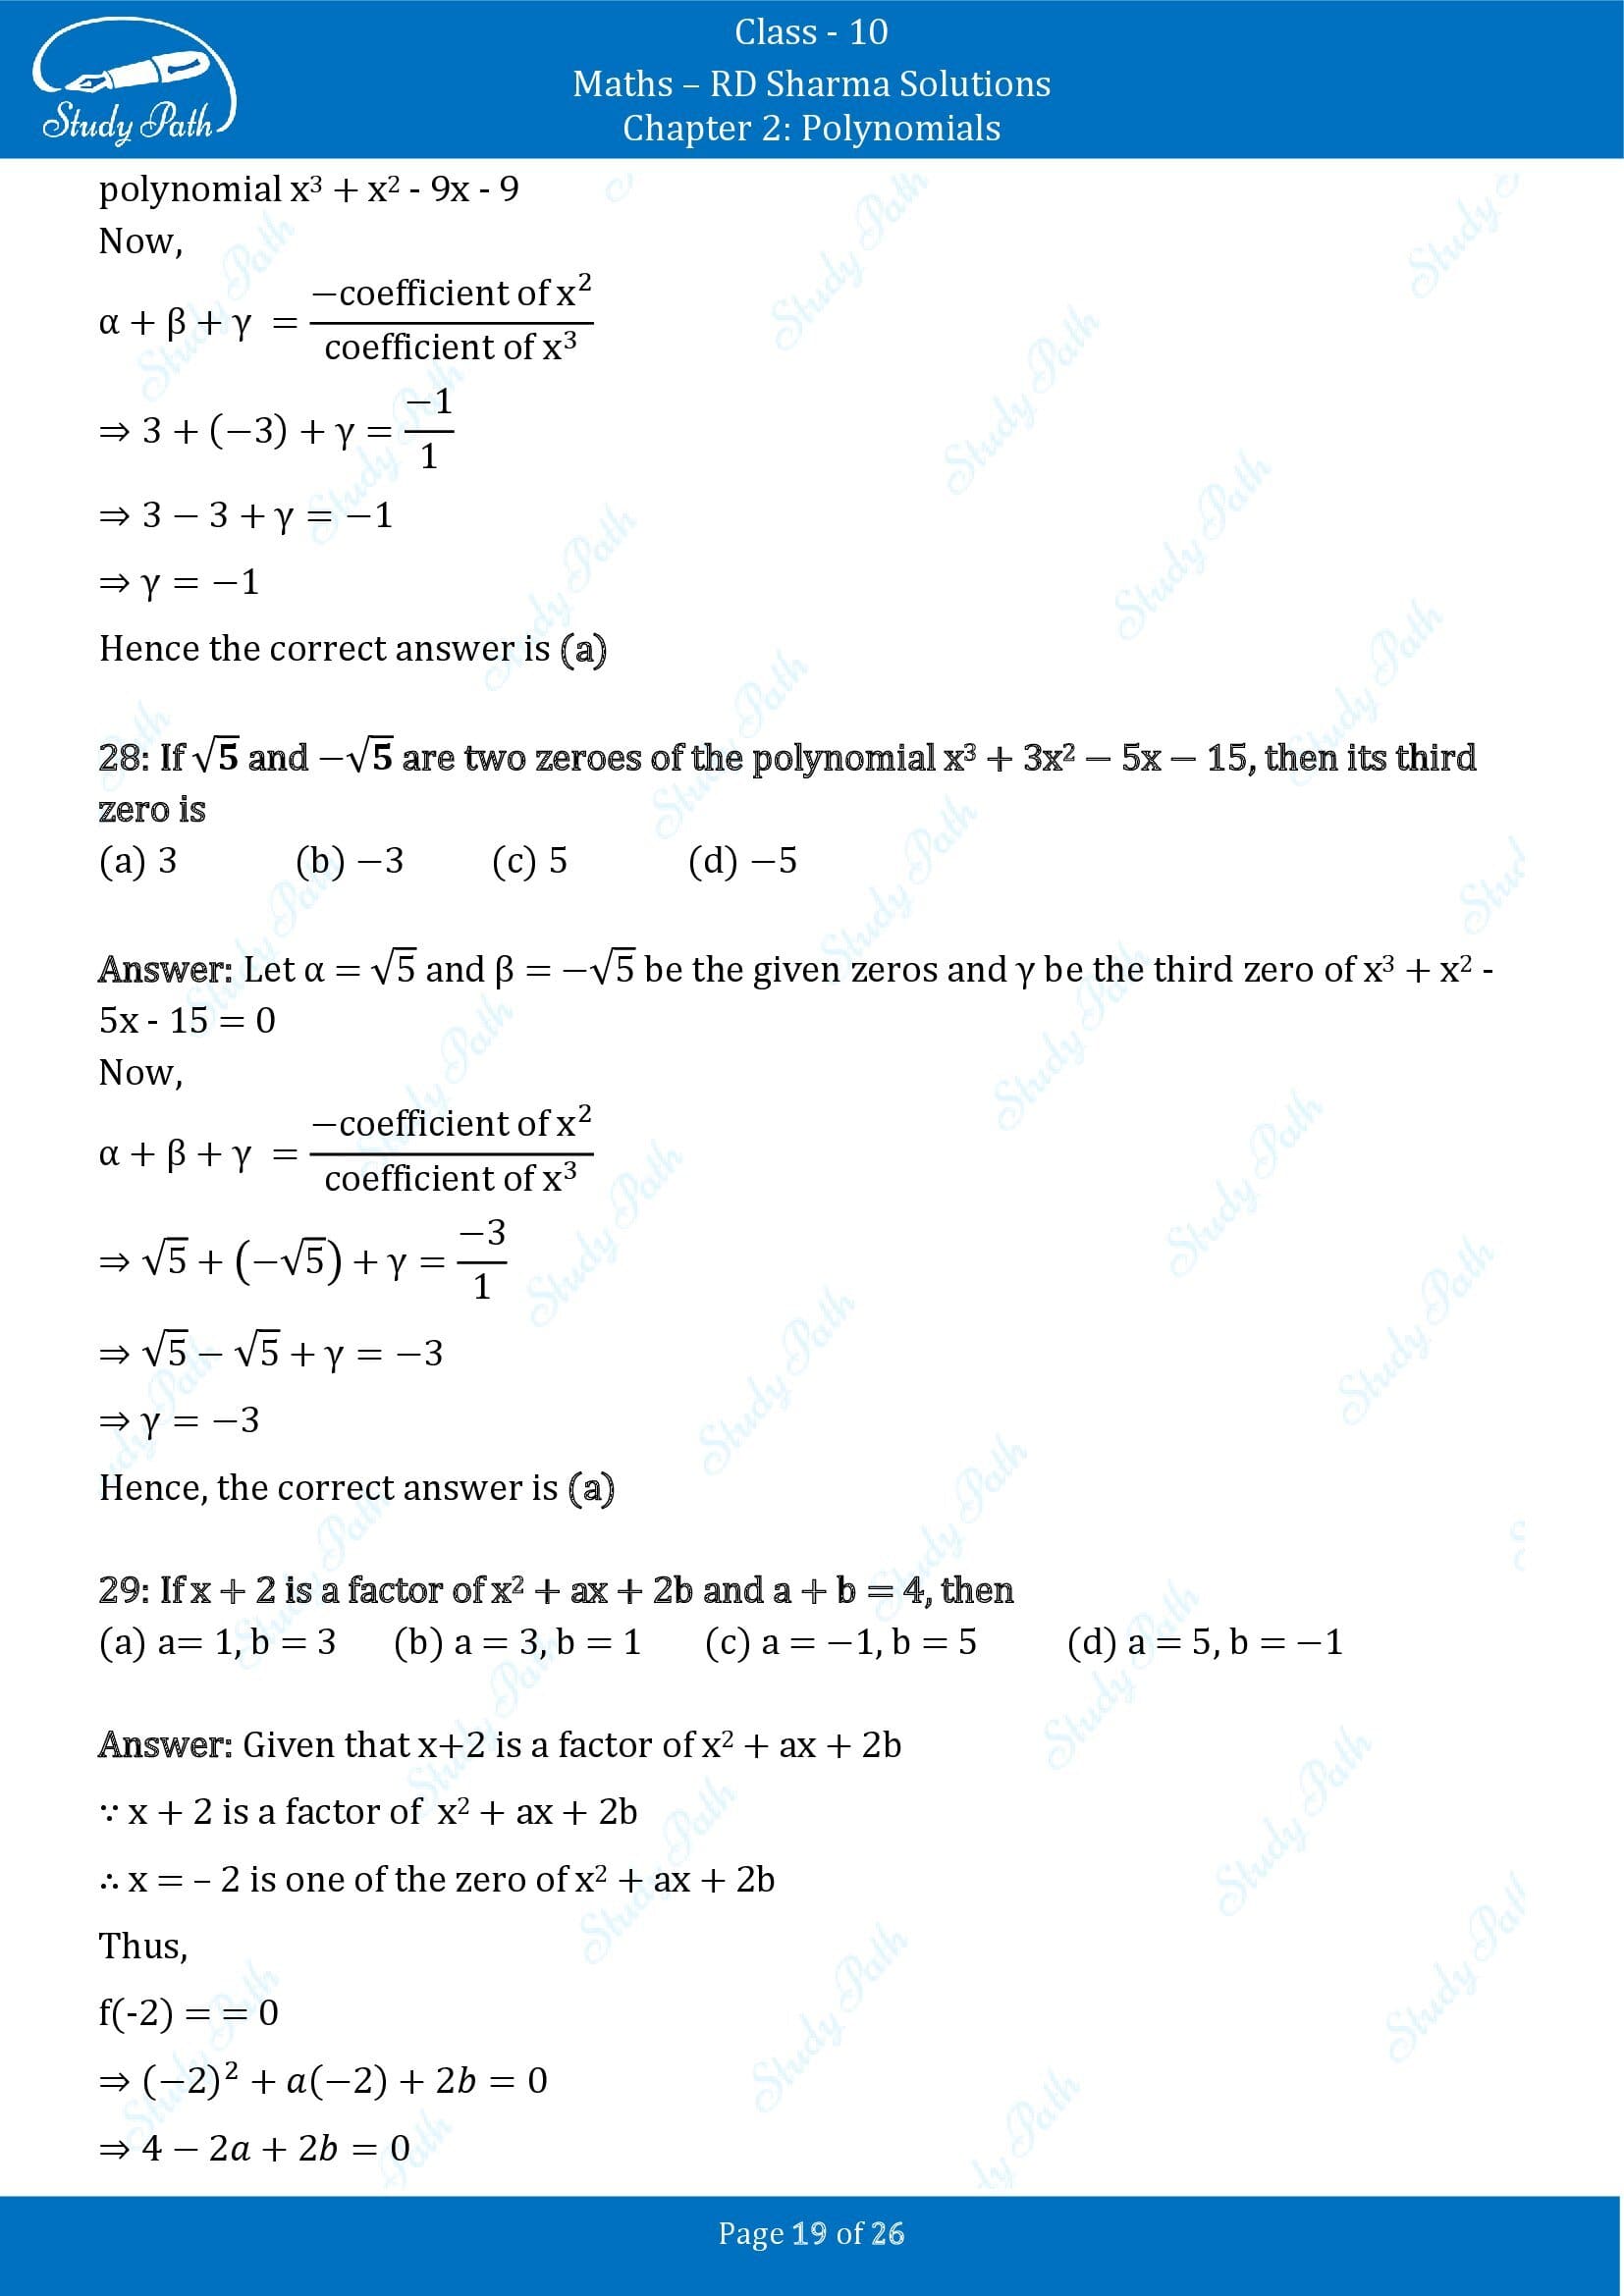 RD Sharma Solutions Class 10 Chapter 2 Polynomials Multiple Choice Questions MCQs 00019